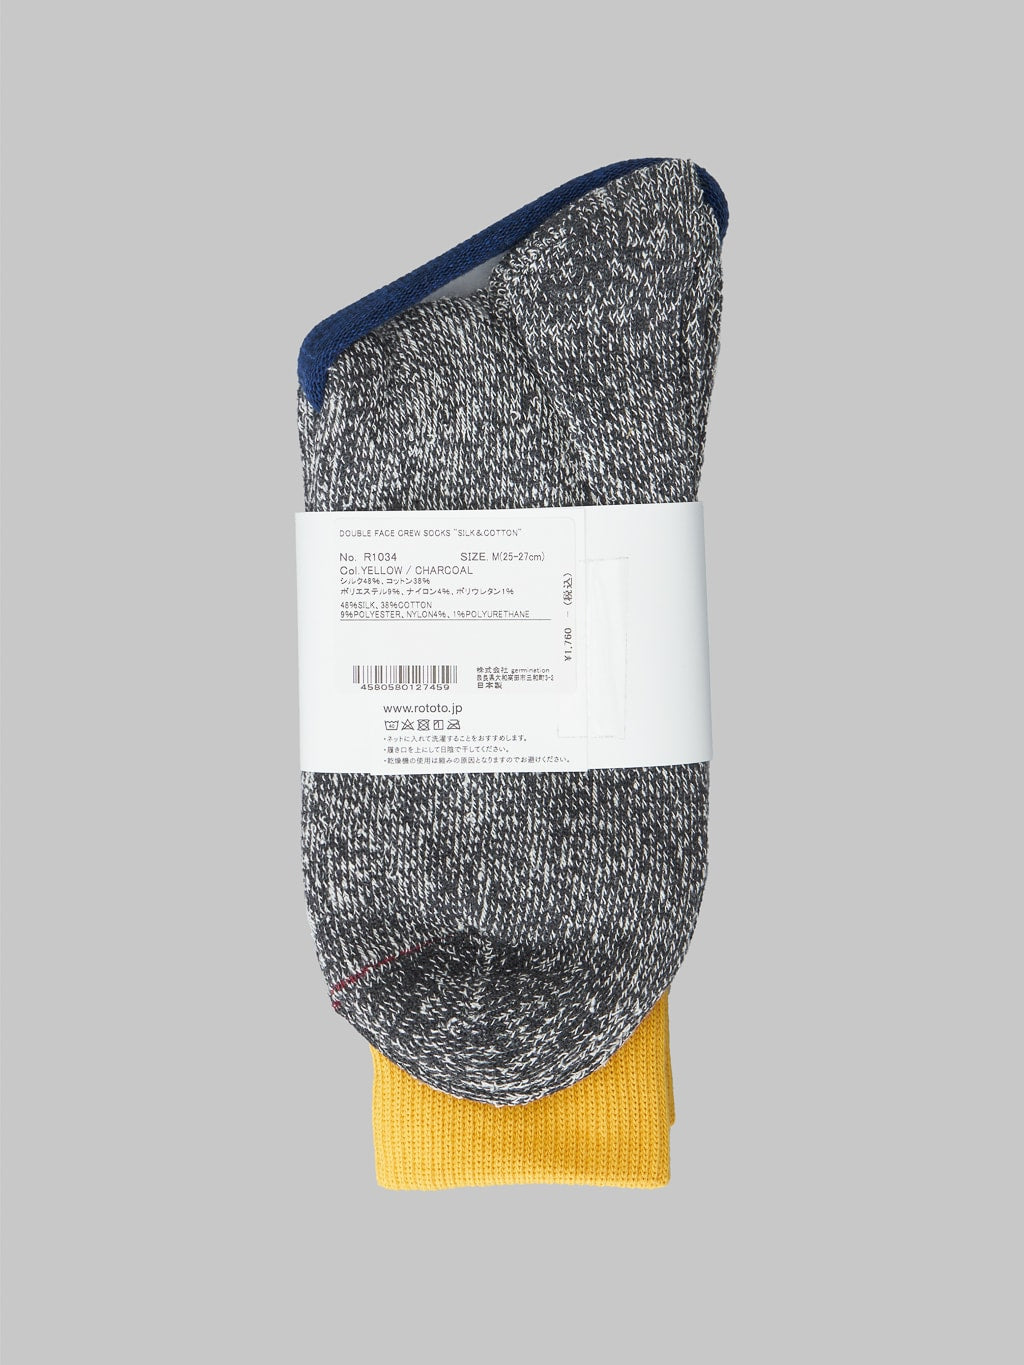 Rototo Double Face Socks Silk Yellow Charcoal Label Detail